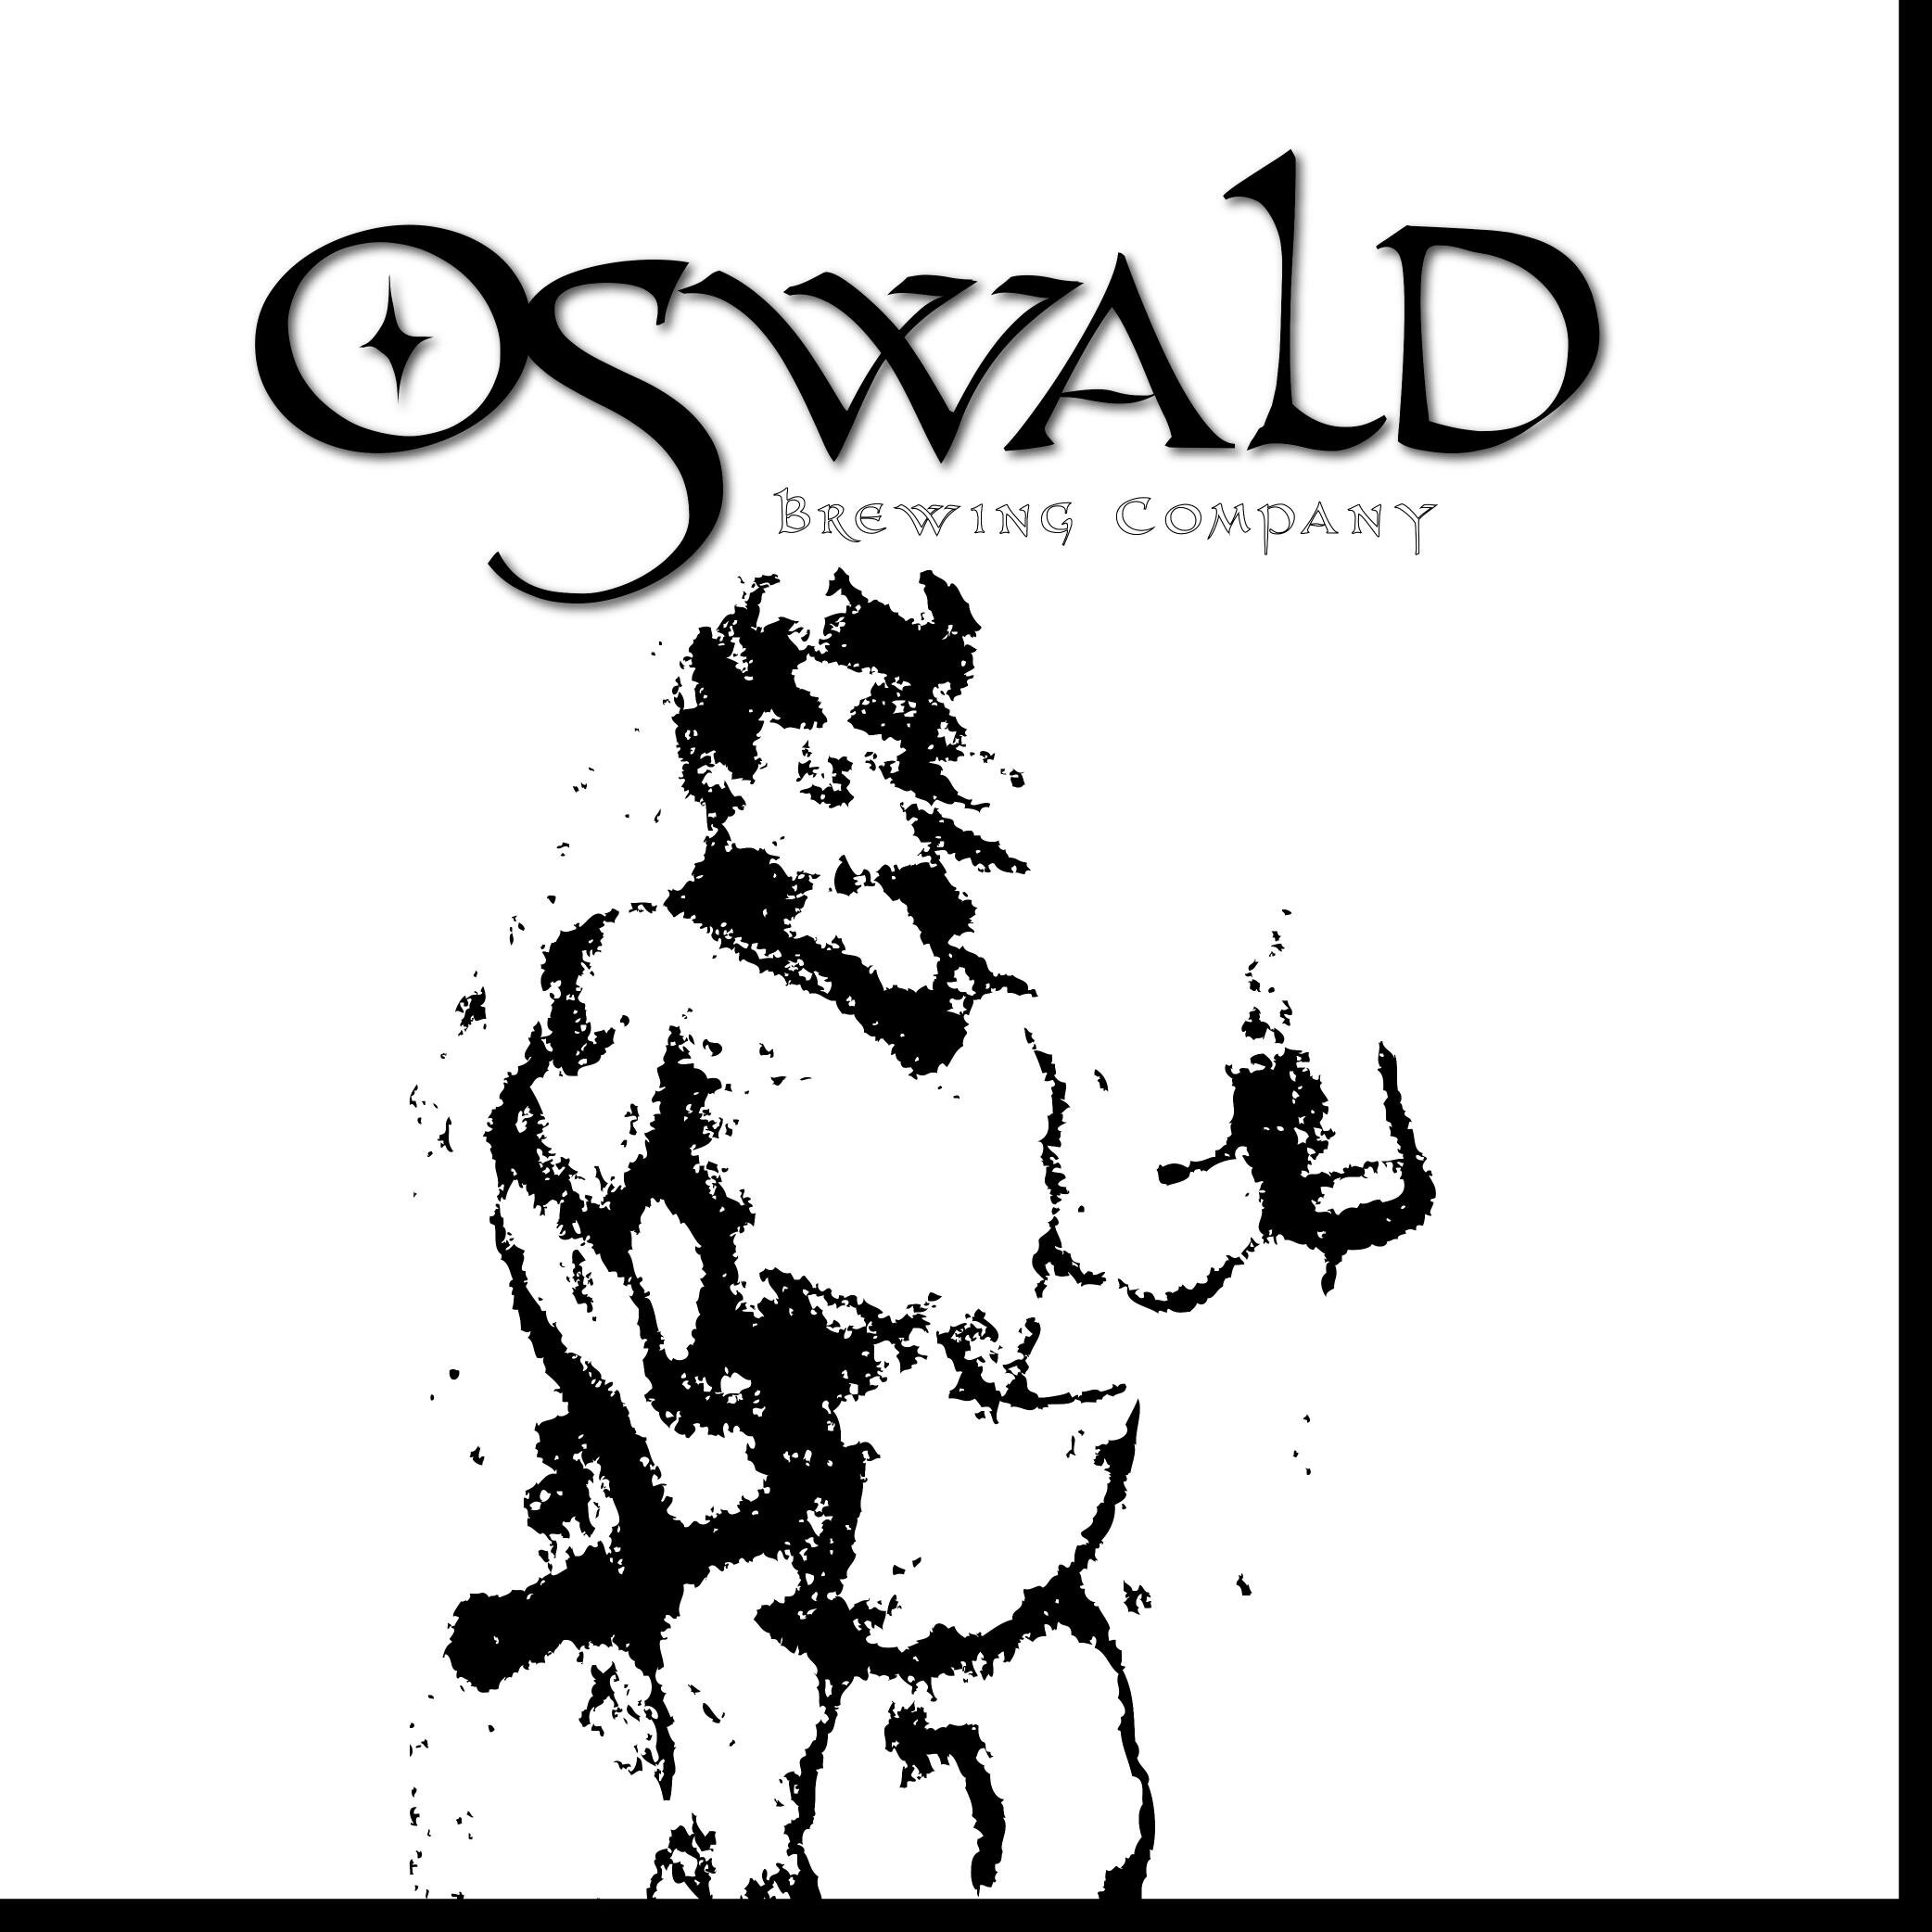 Oswald Brewing Company in Blue Earth, Minnesota - Horns Up!